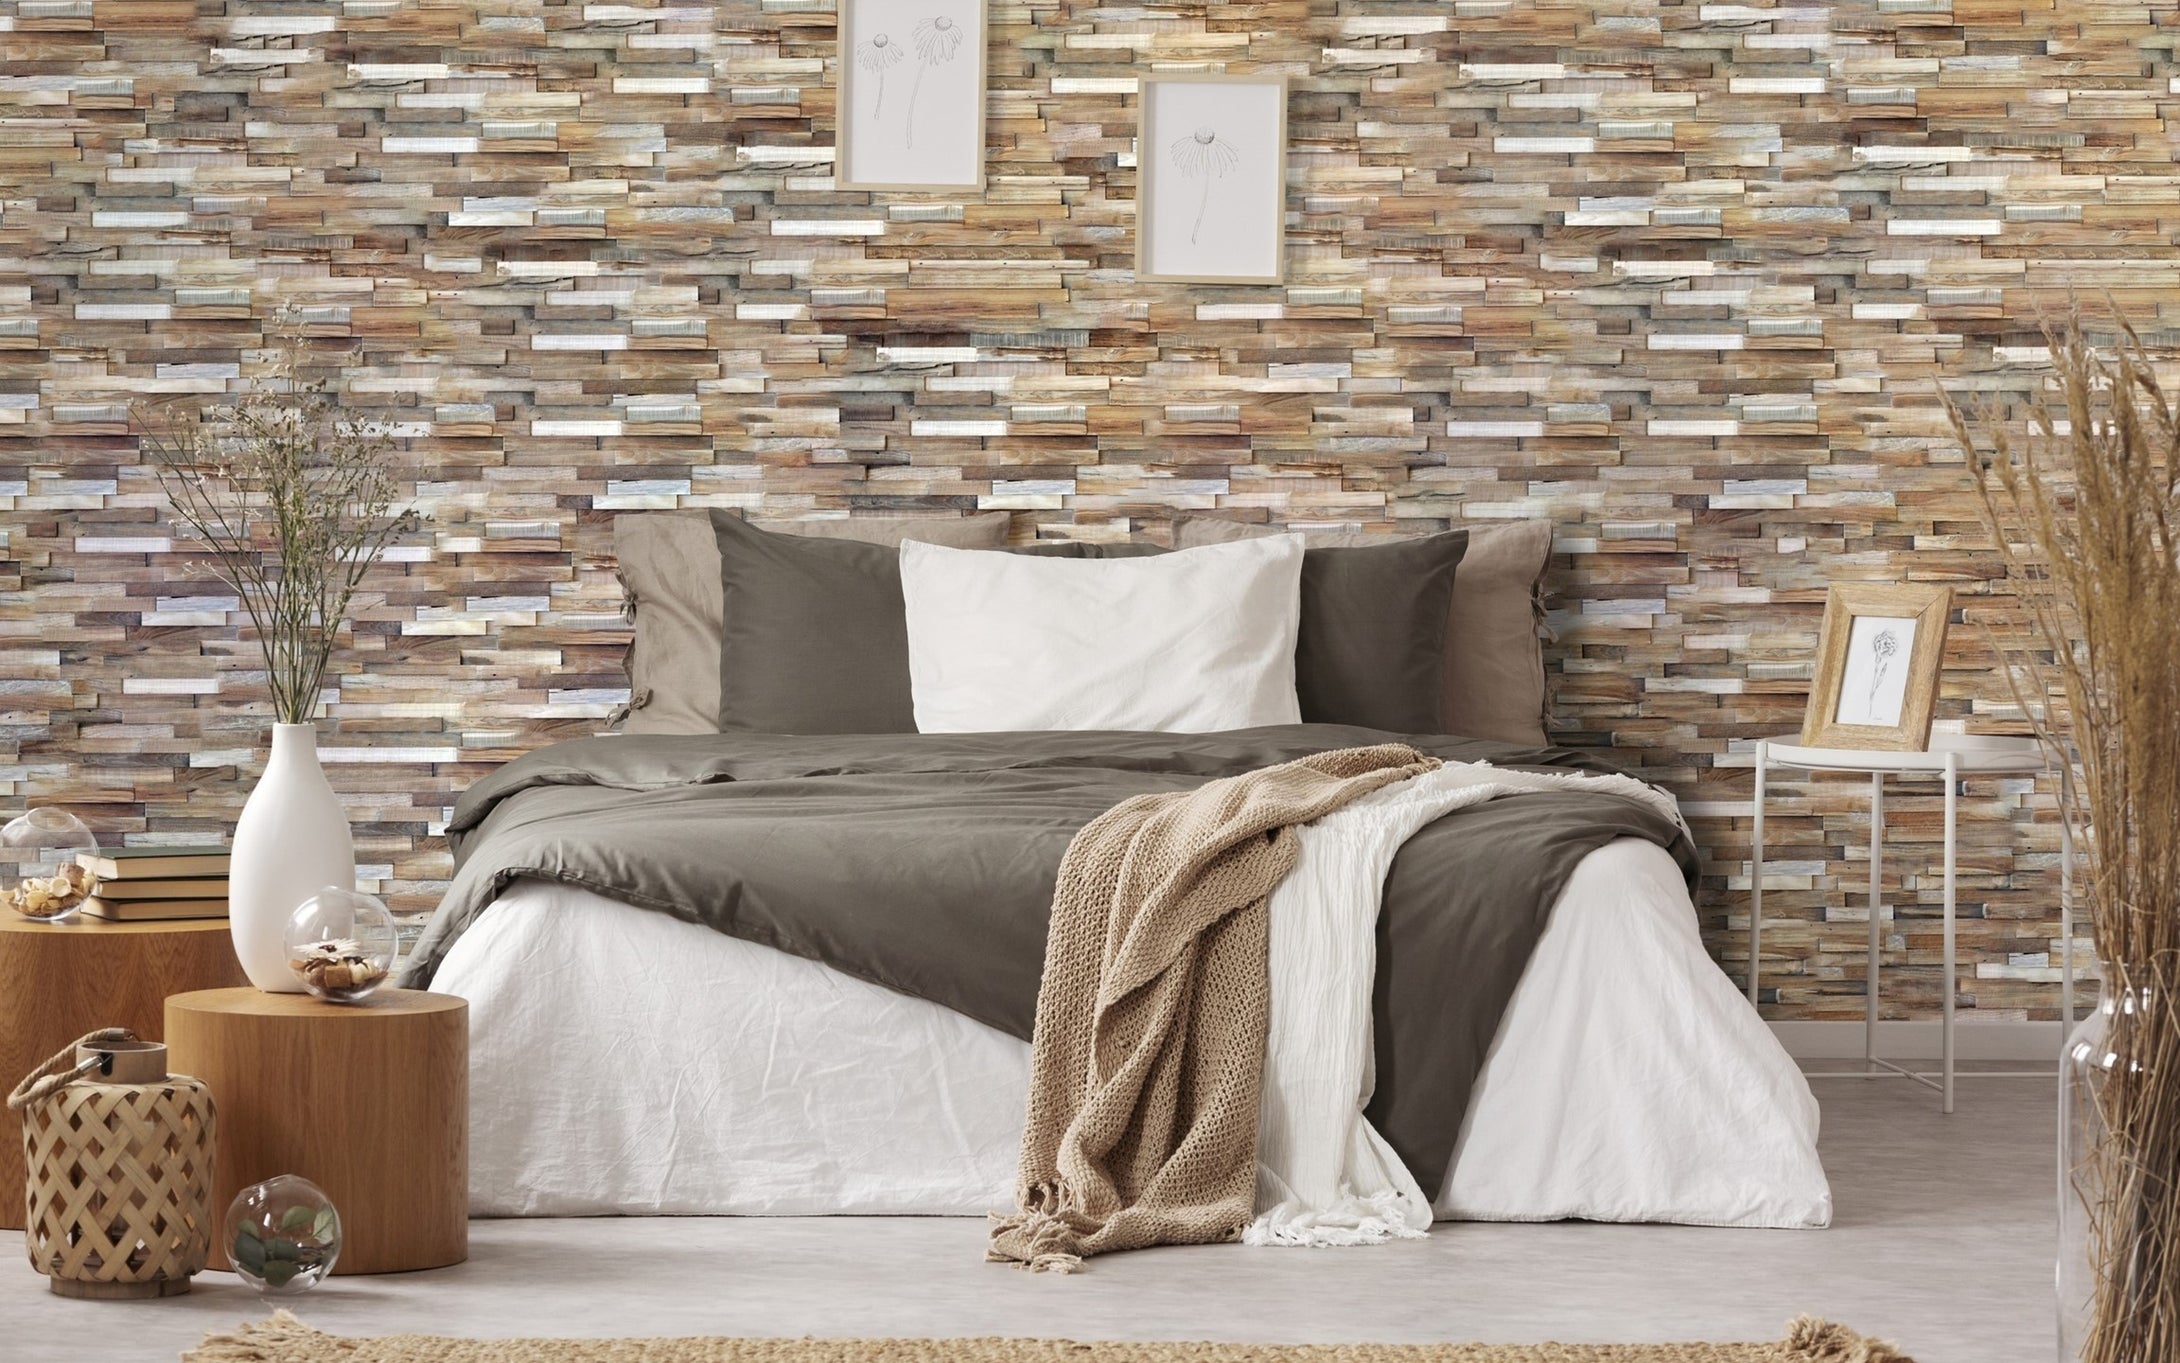 Recycled 3D Teakwood Wall Panels | Au Naturel (Available in Cases or as a Sample) | NOW 20% OFF with promo code WOW20PERCENT ($73.20 per case)